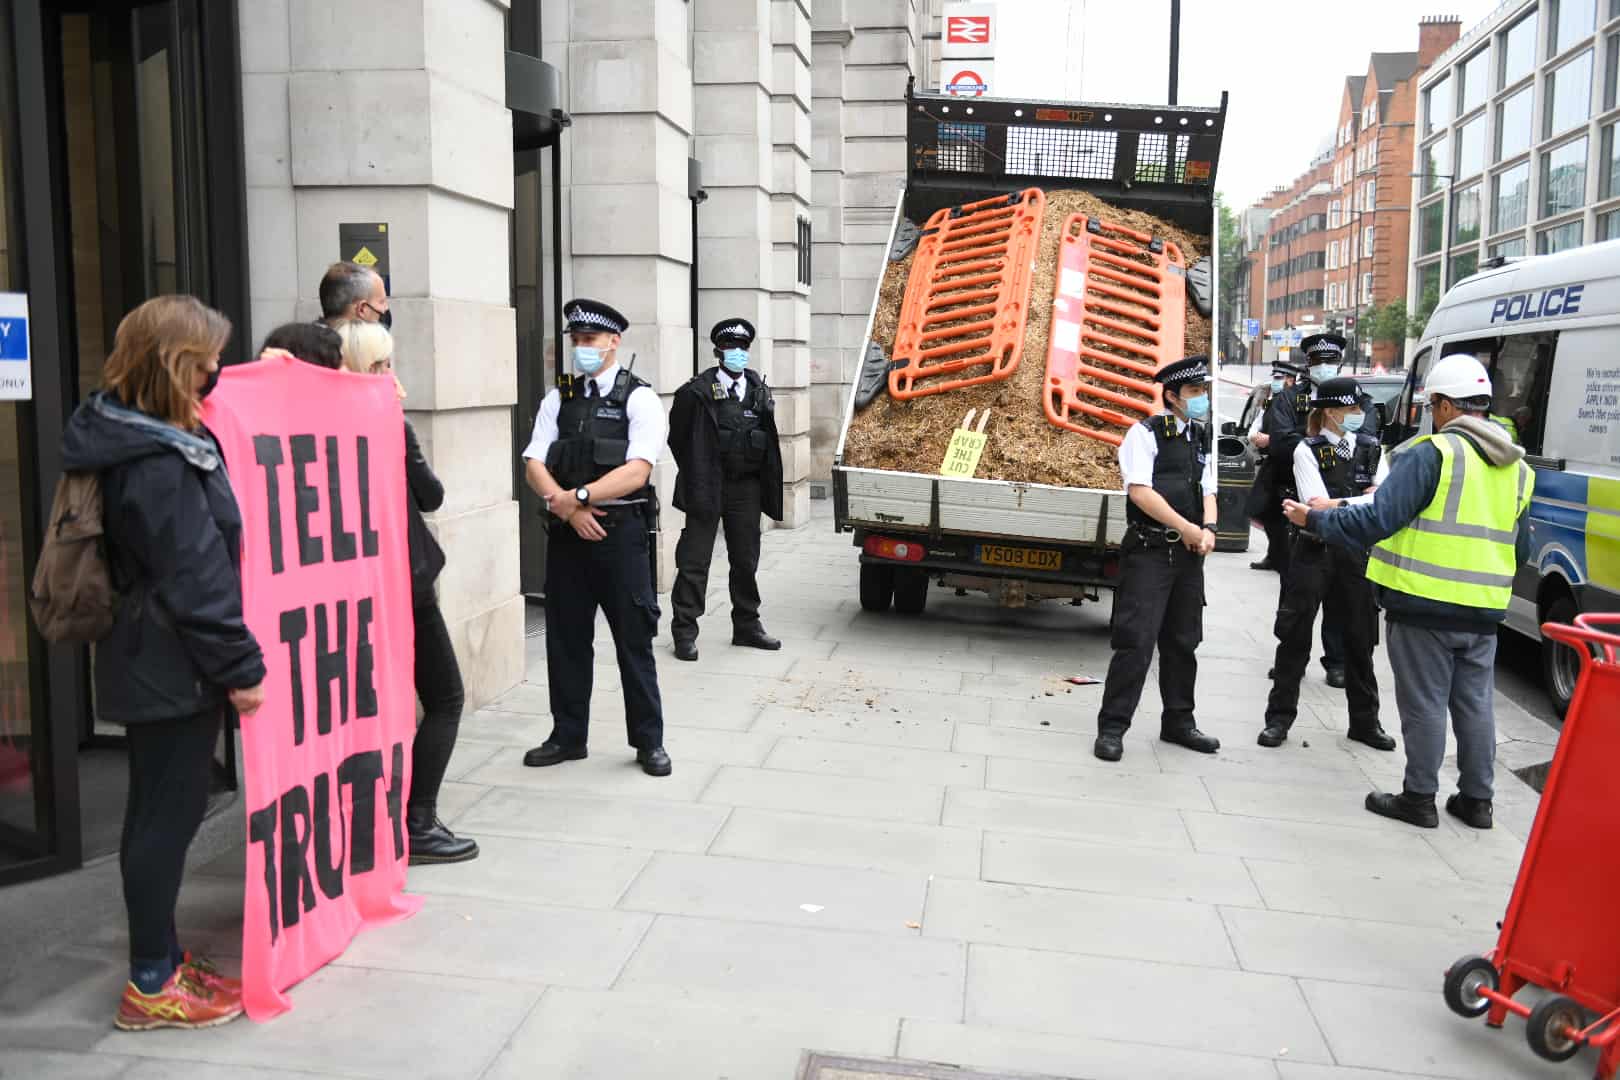 Extinction Rebellion dump 7 tons of horse manure outside Daily Mail offices – telling them to cut the (bull)sh*t